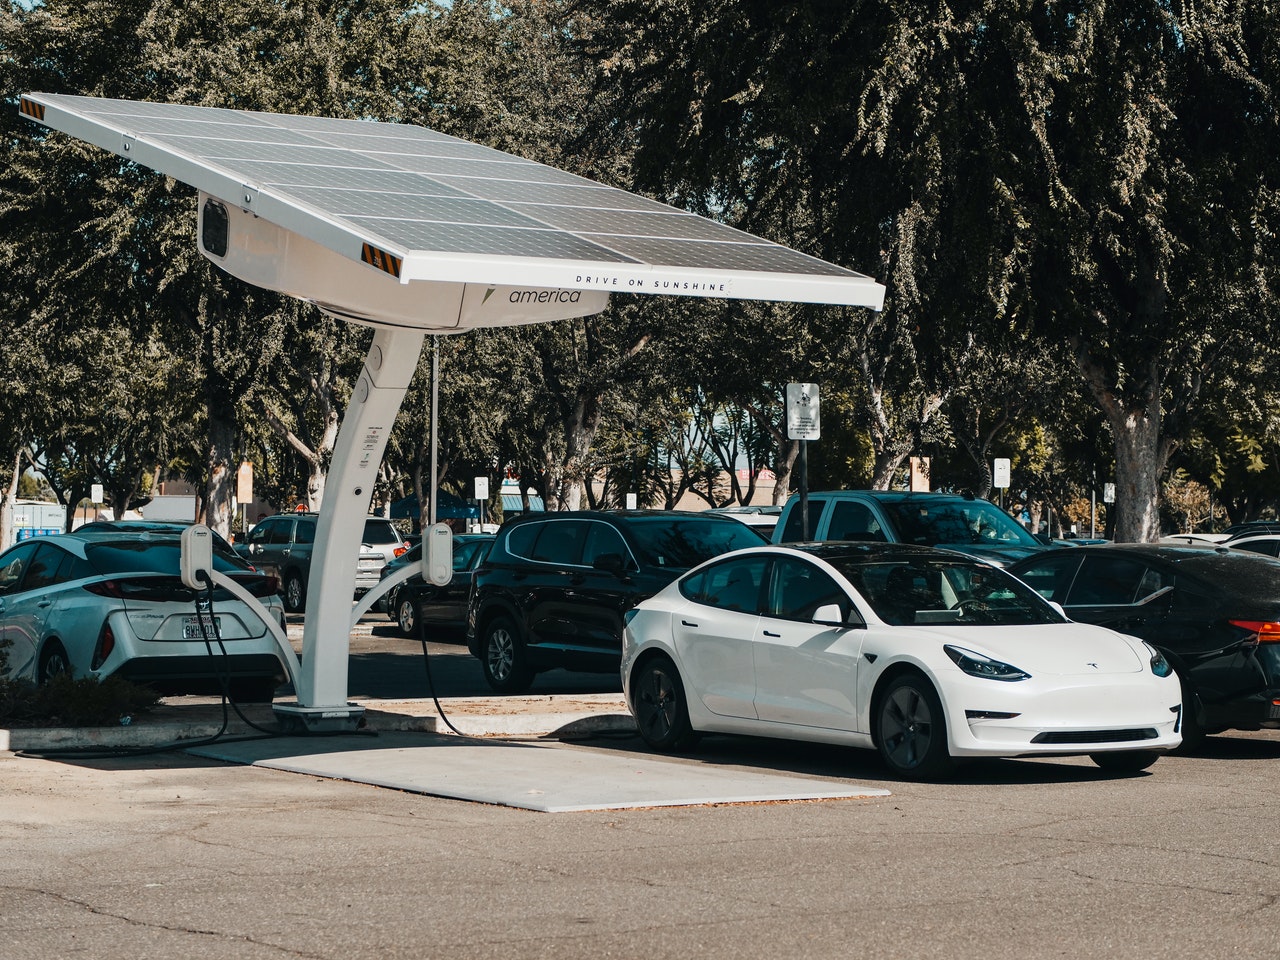 Automakers have so far been skeptical about the feasibility of using onboard solar panels to generate electricity in mass-produced electric vehicles.